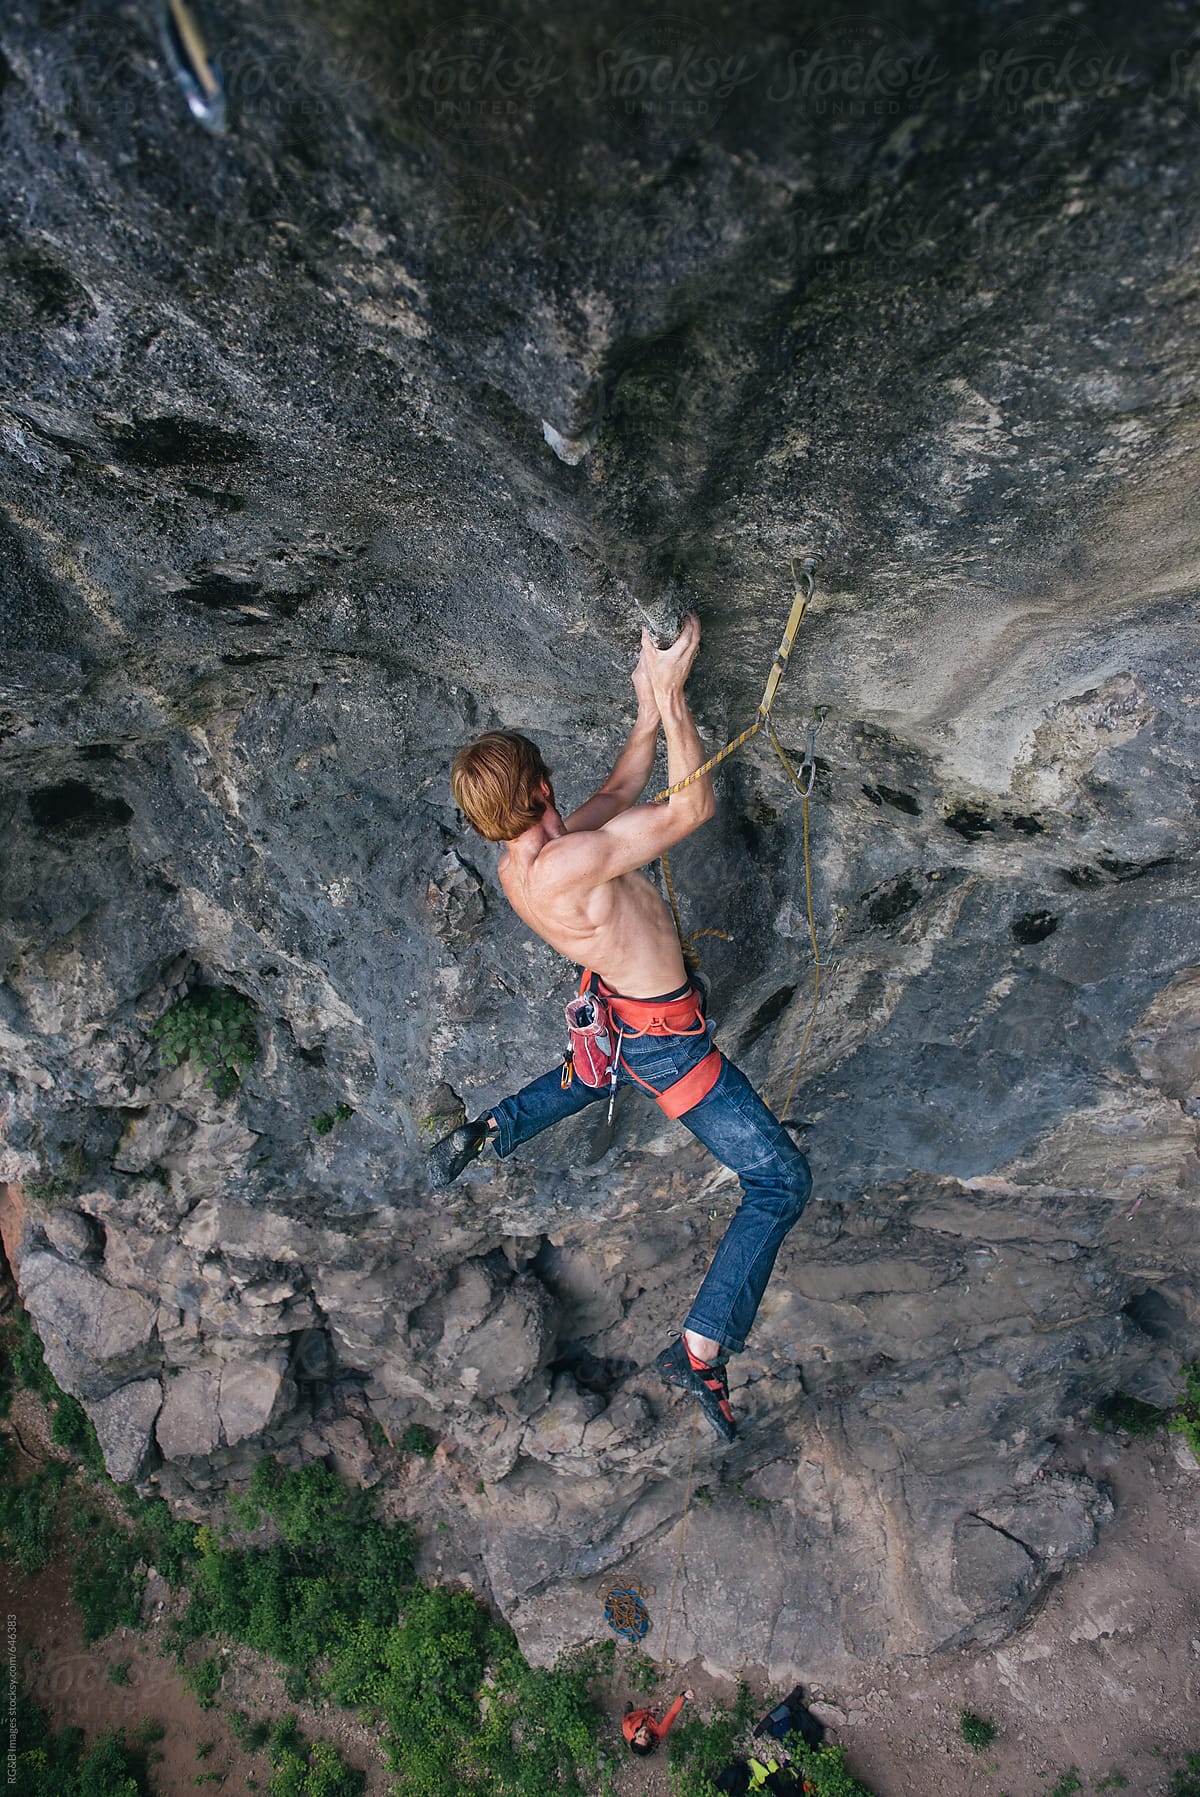 Powerful rock climber hanging from his hands